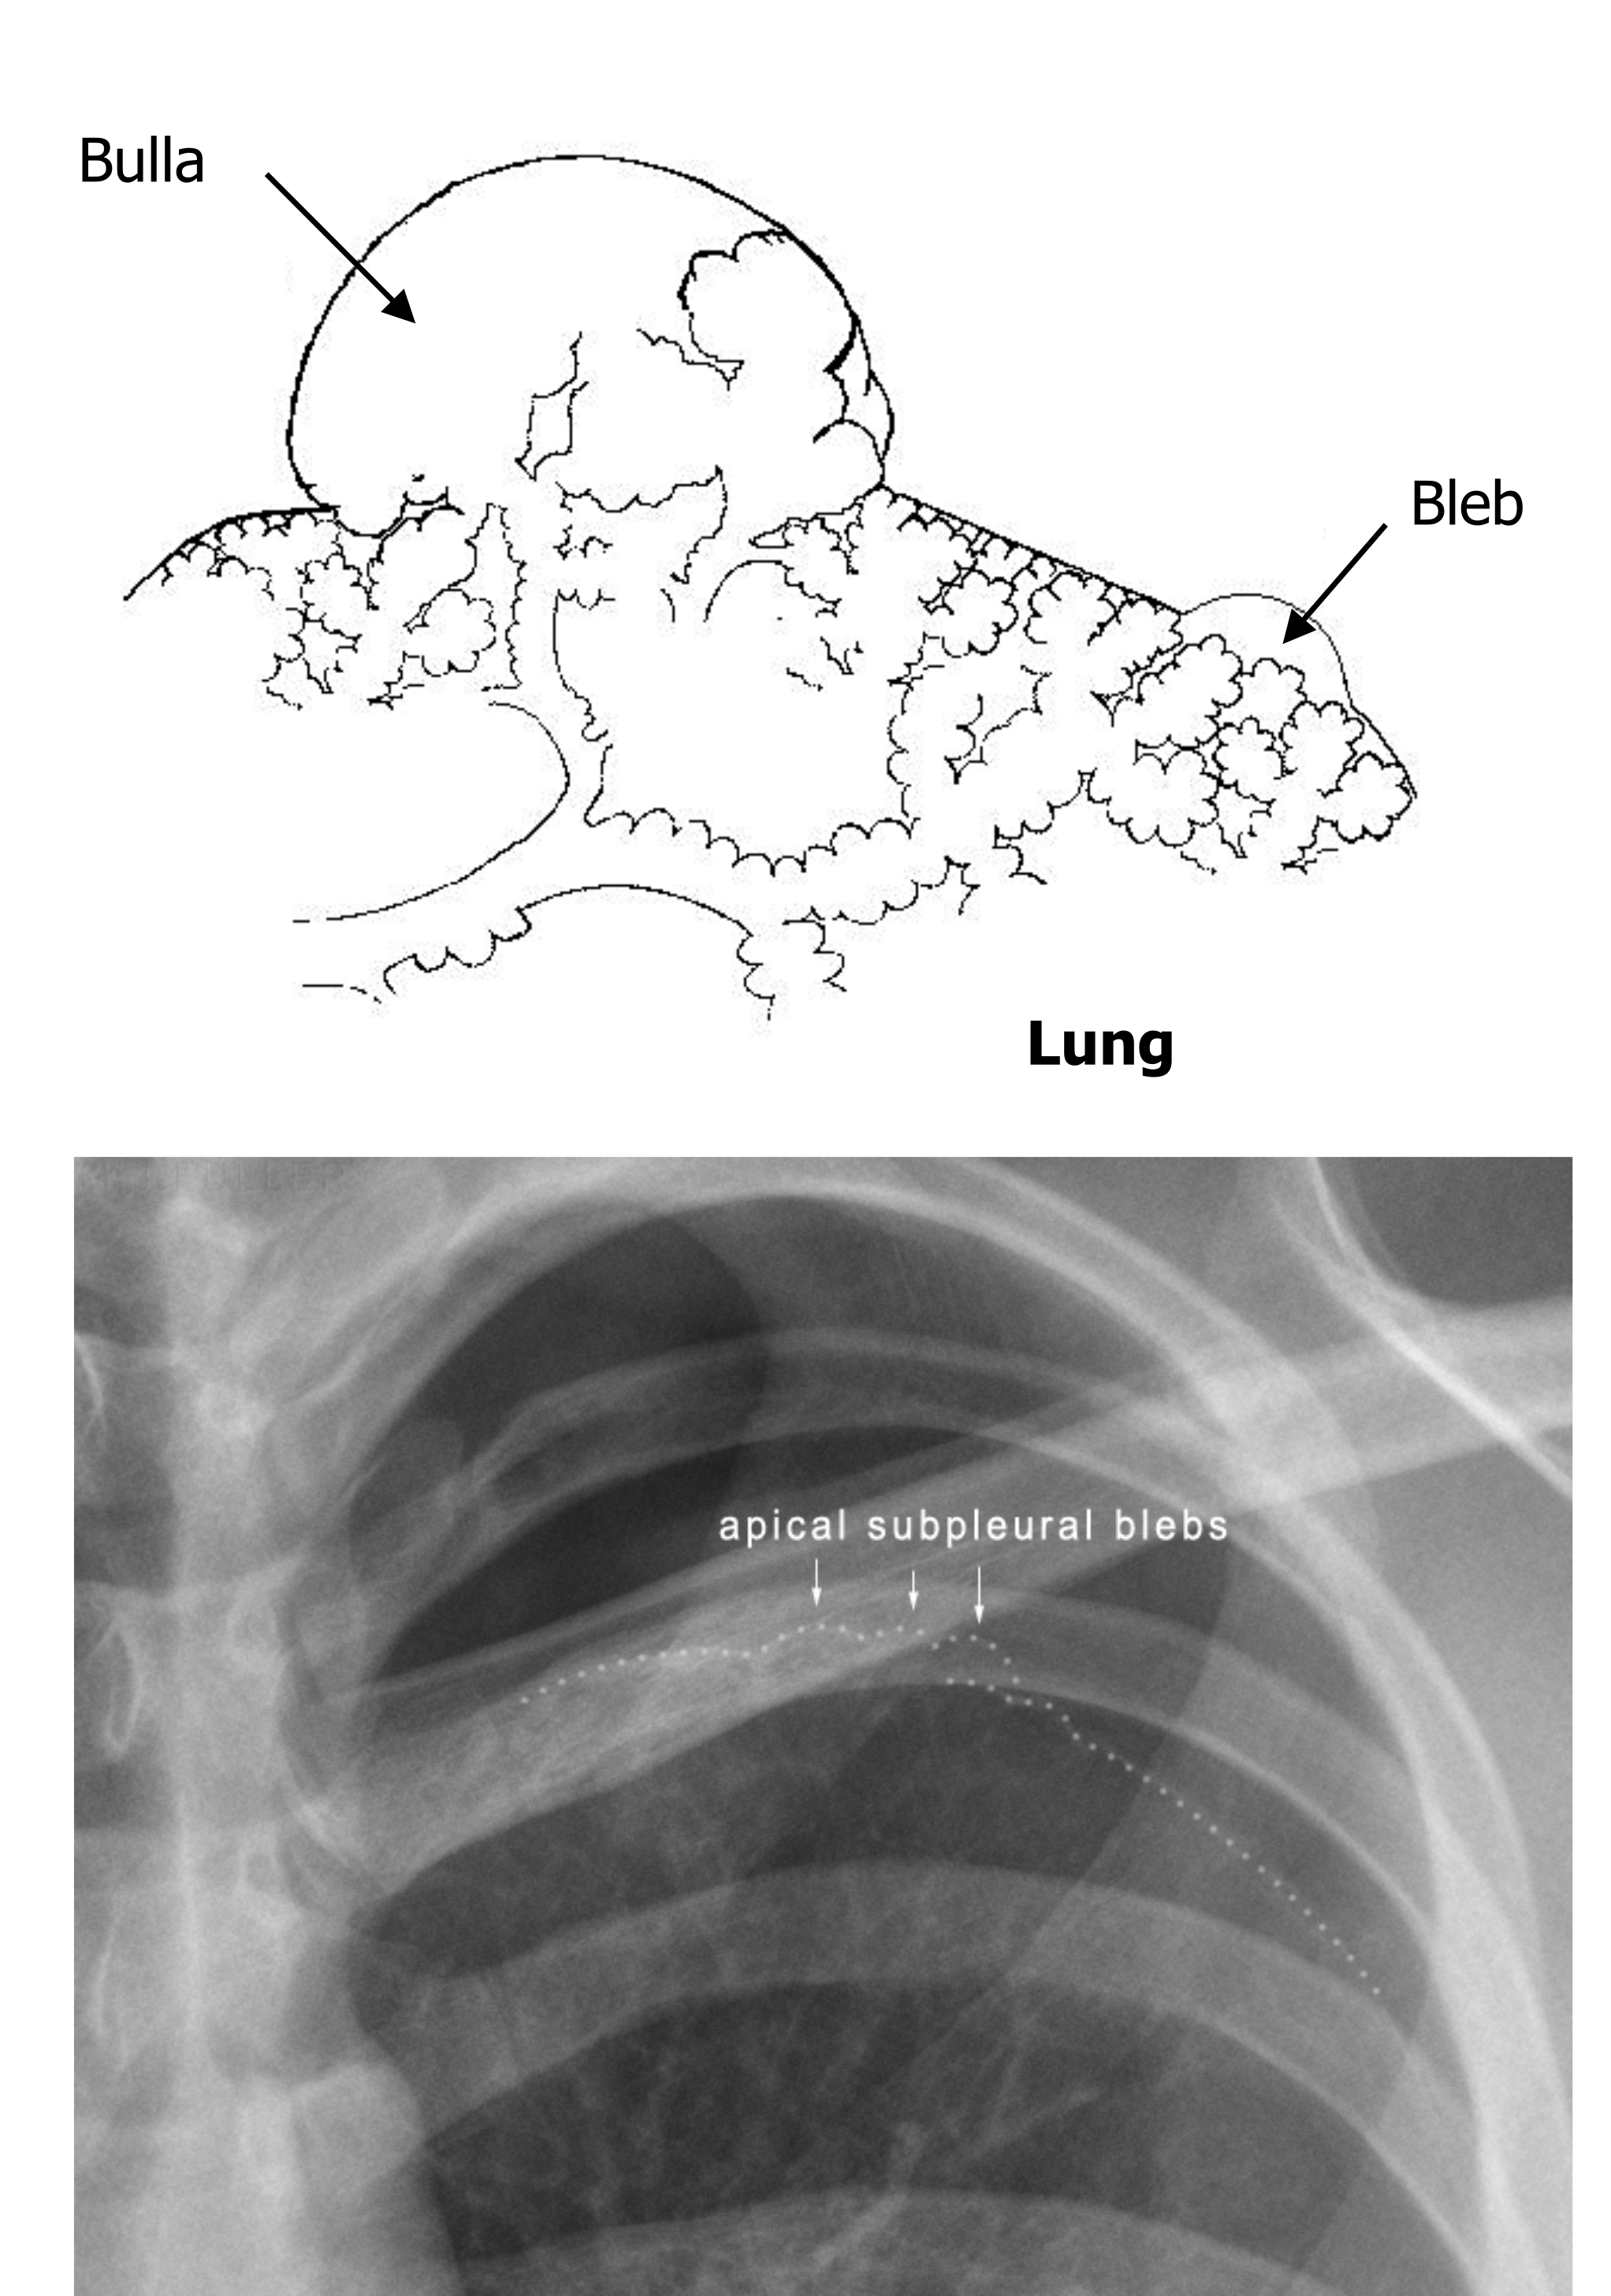 Two panels are shown the first is an illustration of the apical surface of the lung. A prominent bulge is shown at the top of the lung surface and is labelled a bulla. A smaller bugle is also shown next to the bull and is labelled a bleb. The second panel shows the upper left quadrant of an A-P chest x-ray. a dotted white line is overlaid to emphasis that the apical surface of the lung is distorted with three raised lumps that are labelled as apical subpleural blebs.